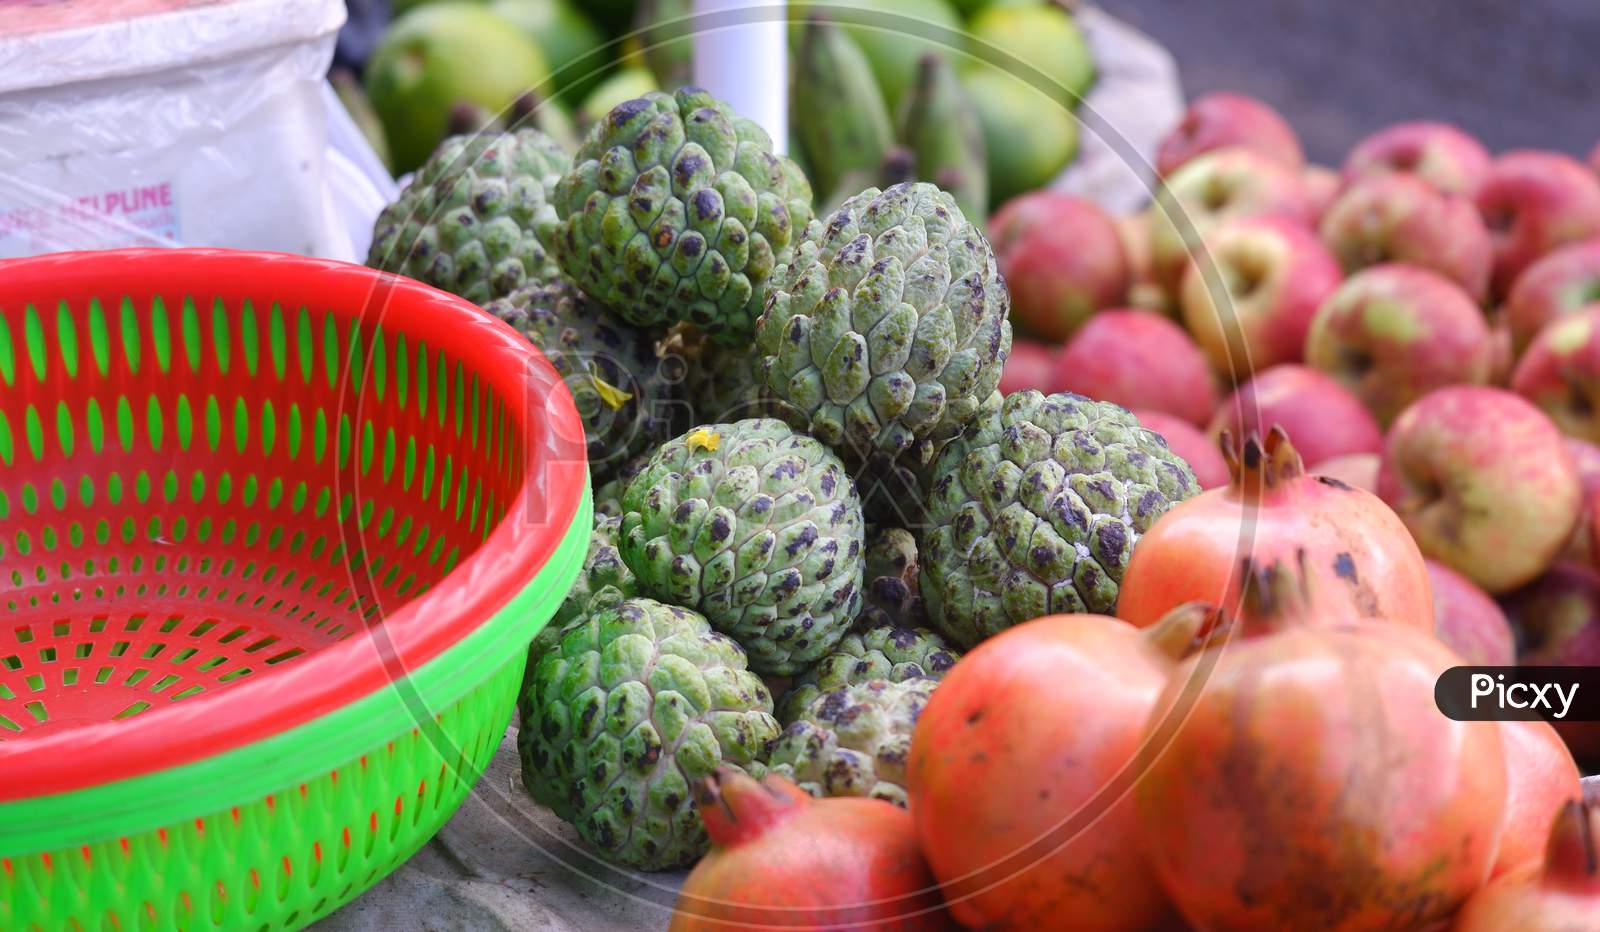 Close Image Of Fresh Sugar Apple Or Sweet Sop Being Sold On Road In India.